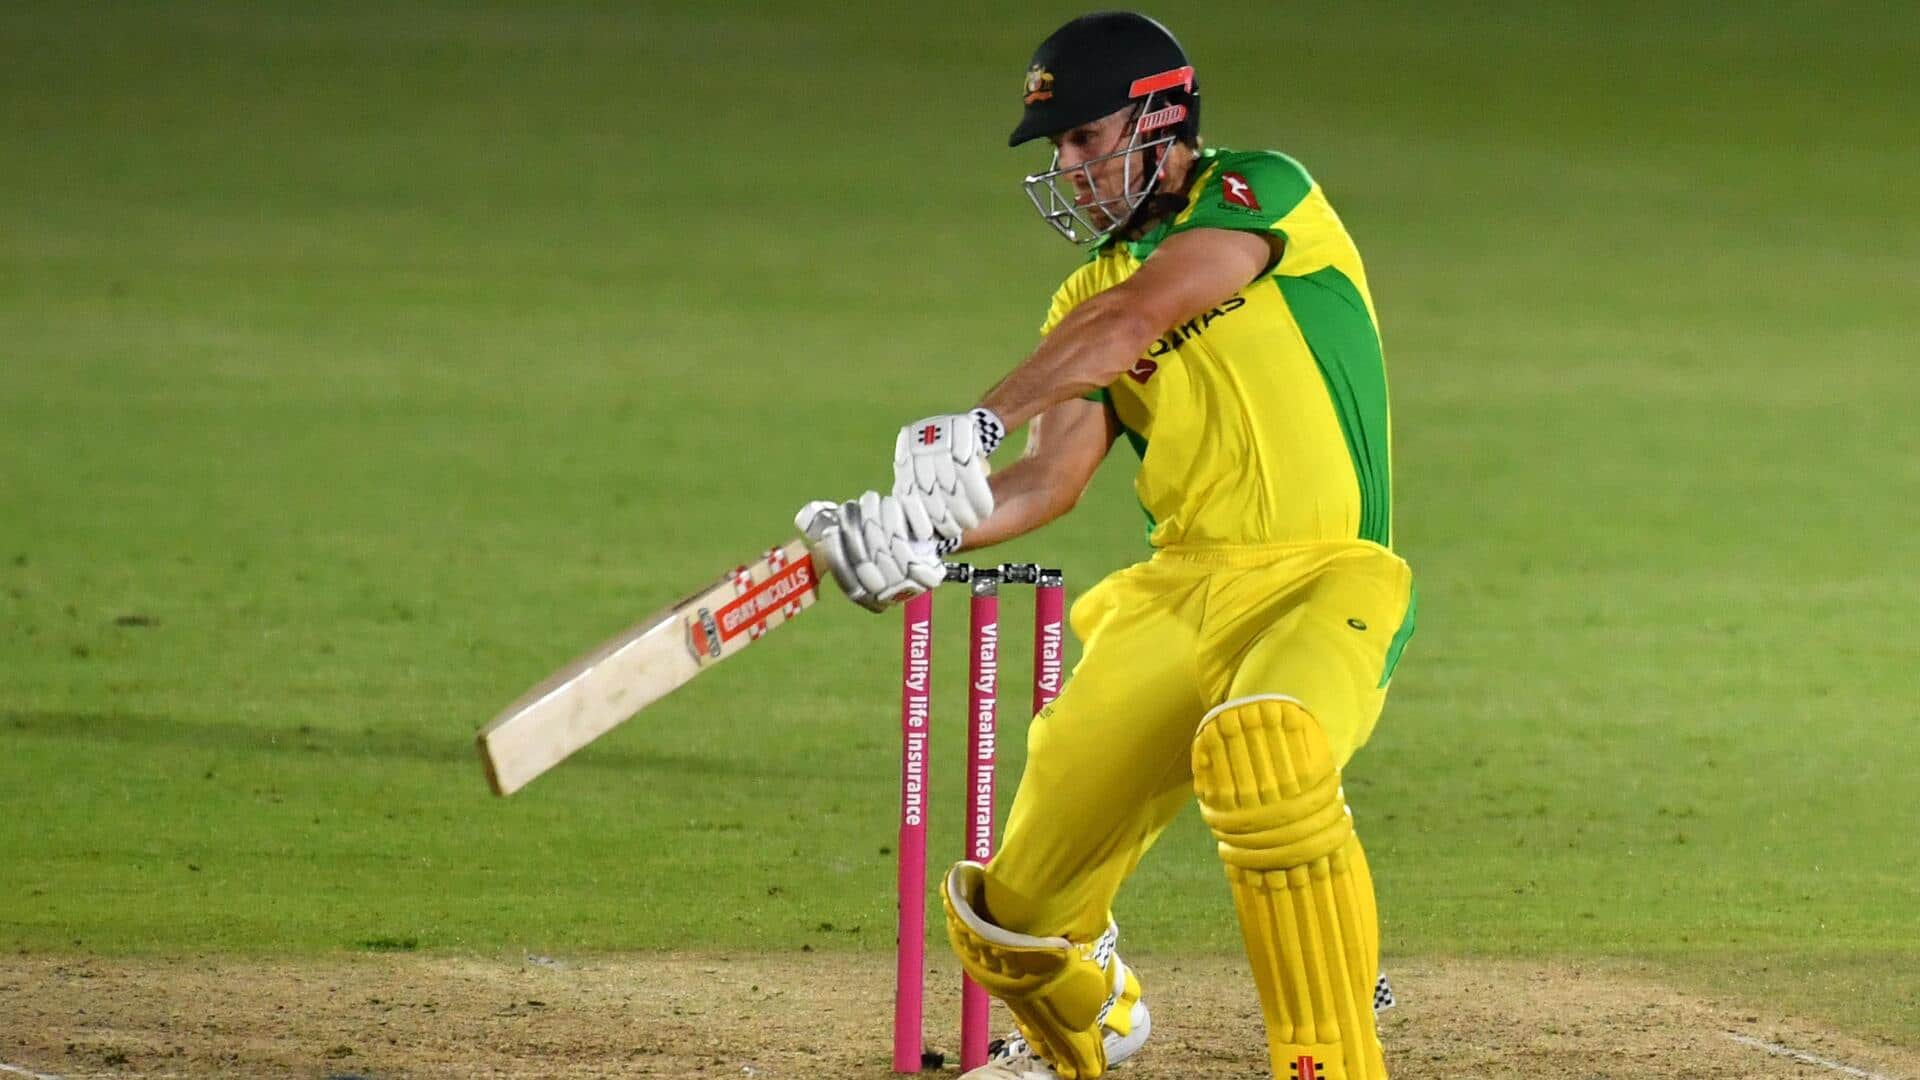 Mitchell Marsh completes 500 ODI runs against South Africa: Stats